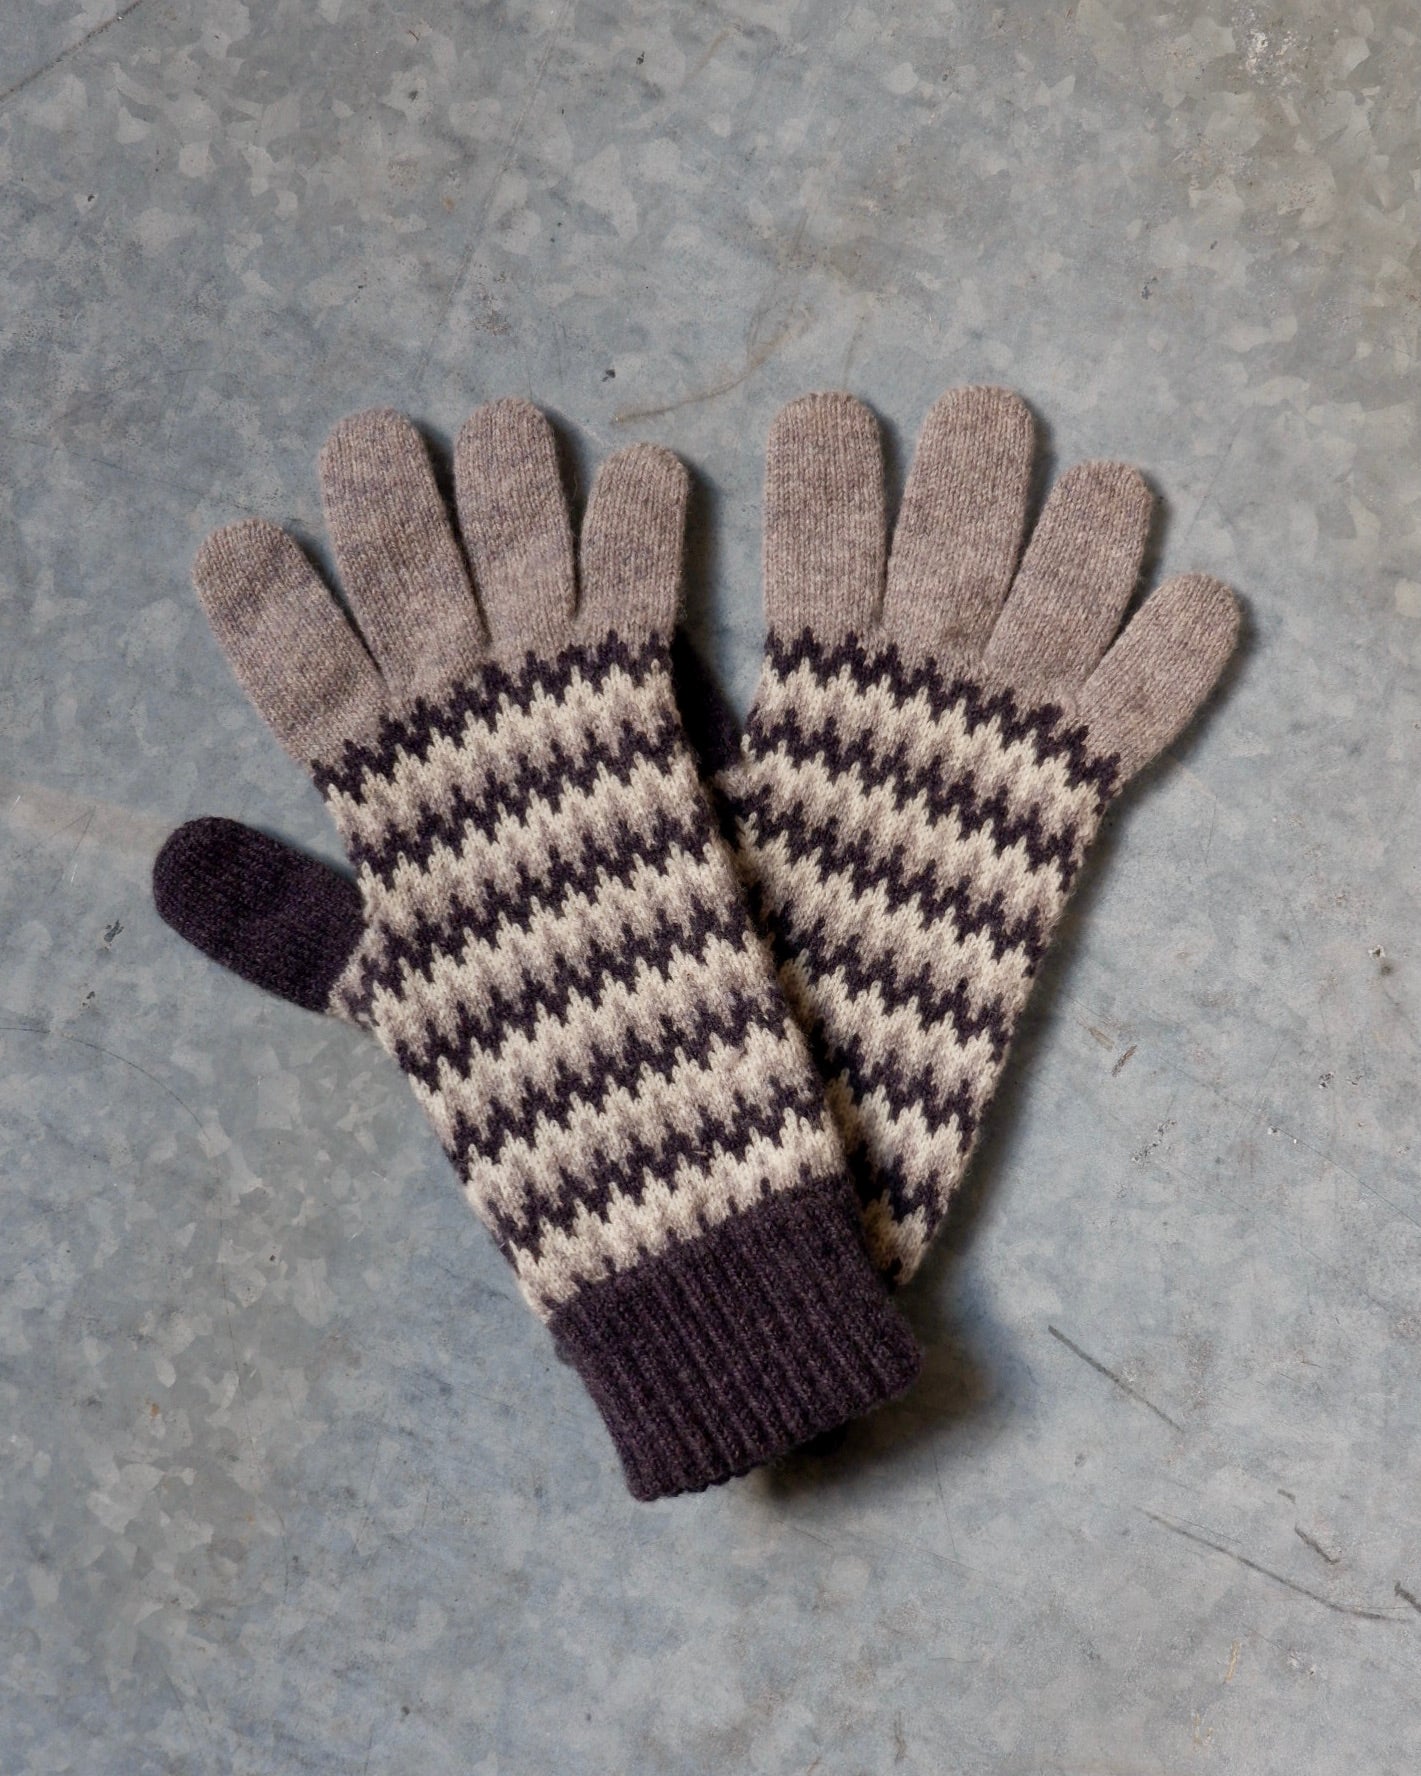 sally nencini textiles knit lambswool gloves homeware clothing